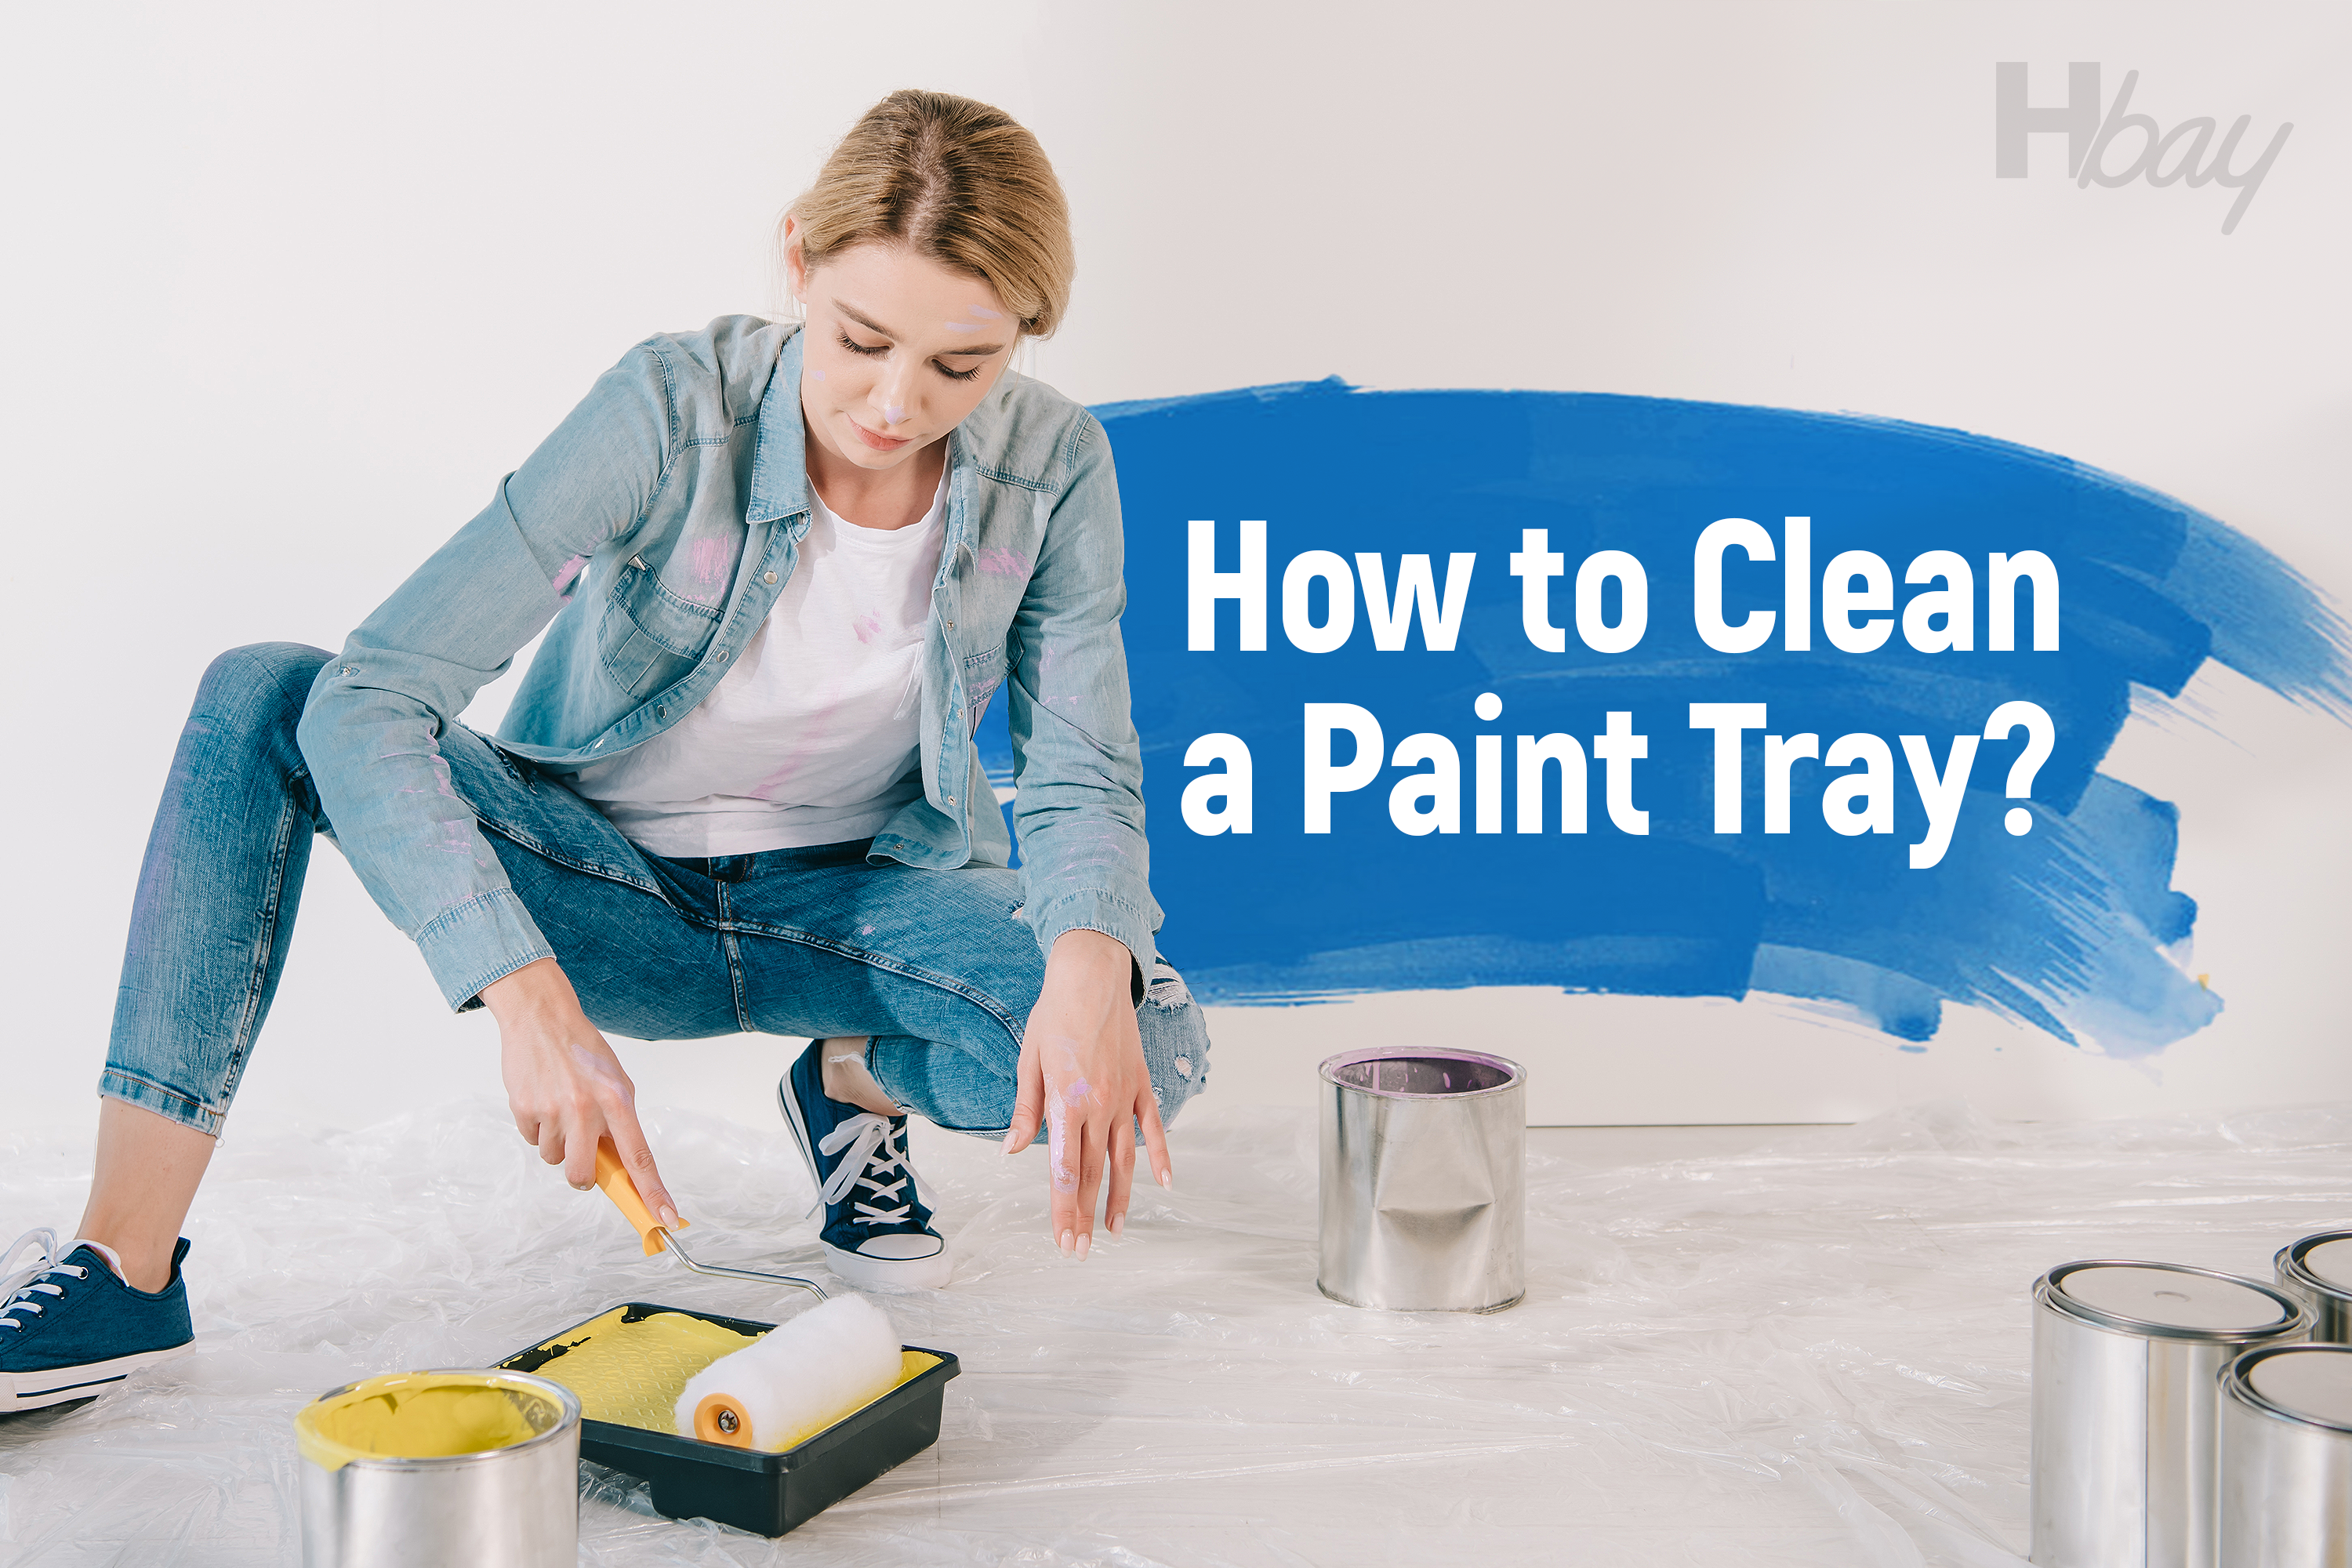 How to Clean a Paint Tray